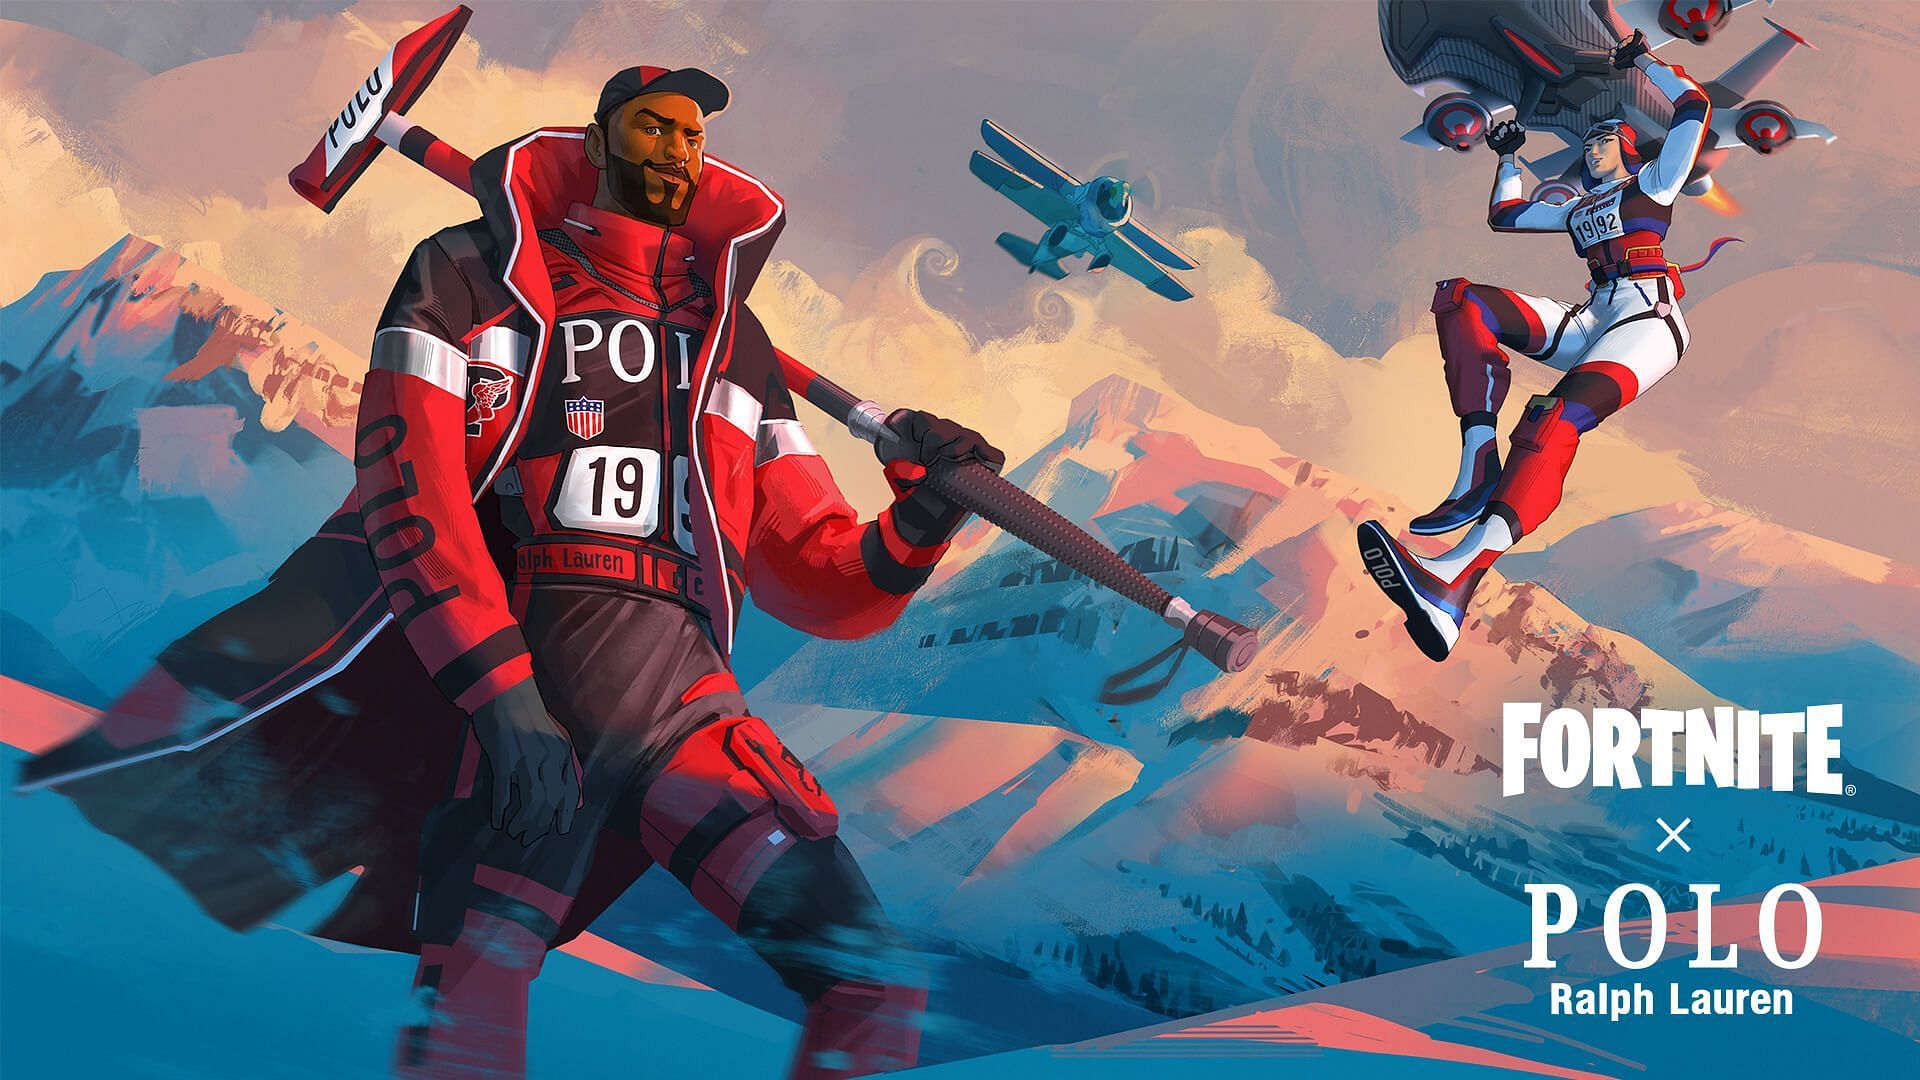 Fortnite x Polo (Ralph Lauren) collaboration Skins, release date, and